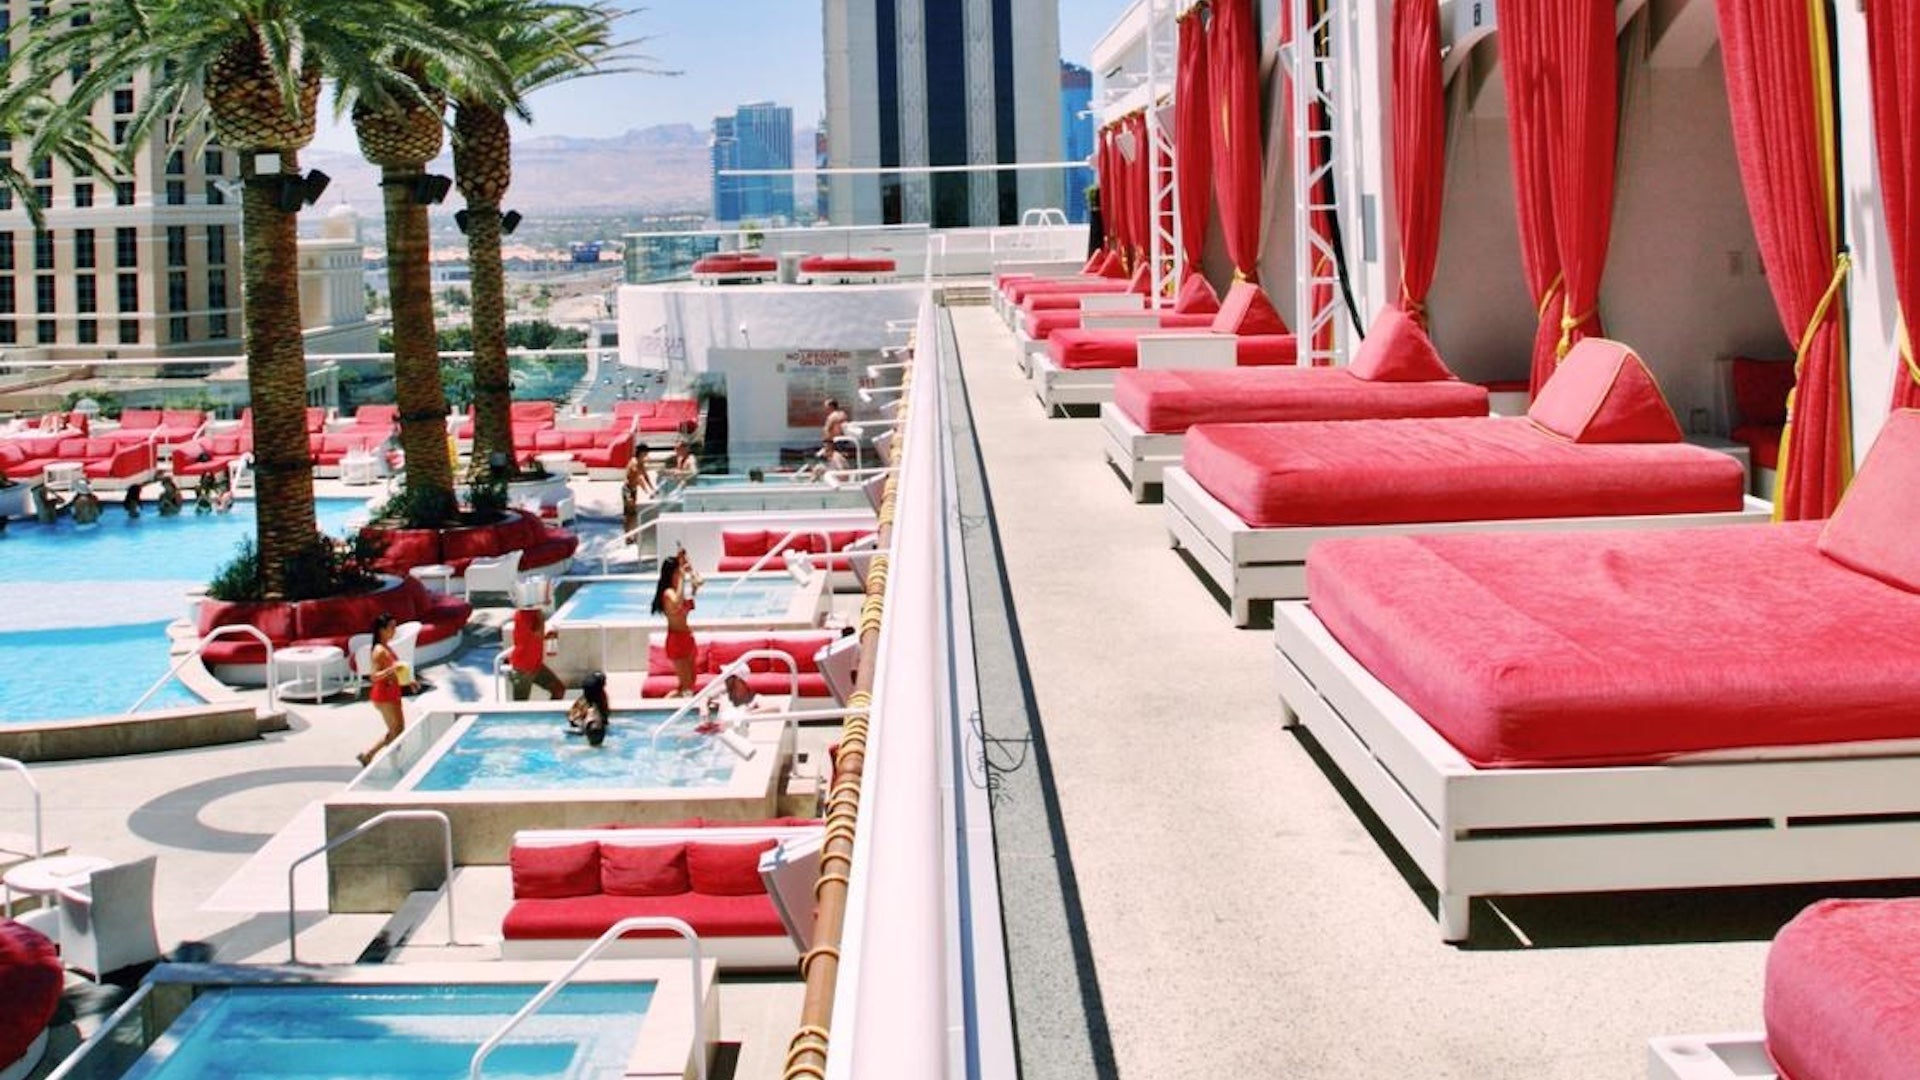 Red cabana chairs on a deck overlooking a pool in Las Vegas